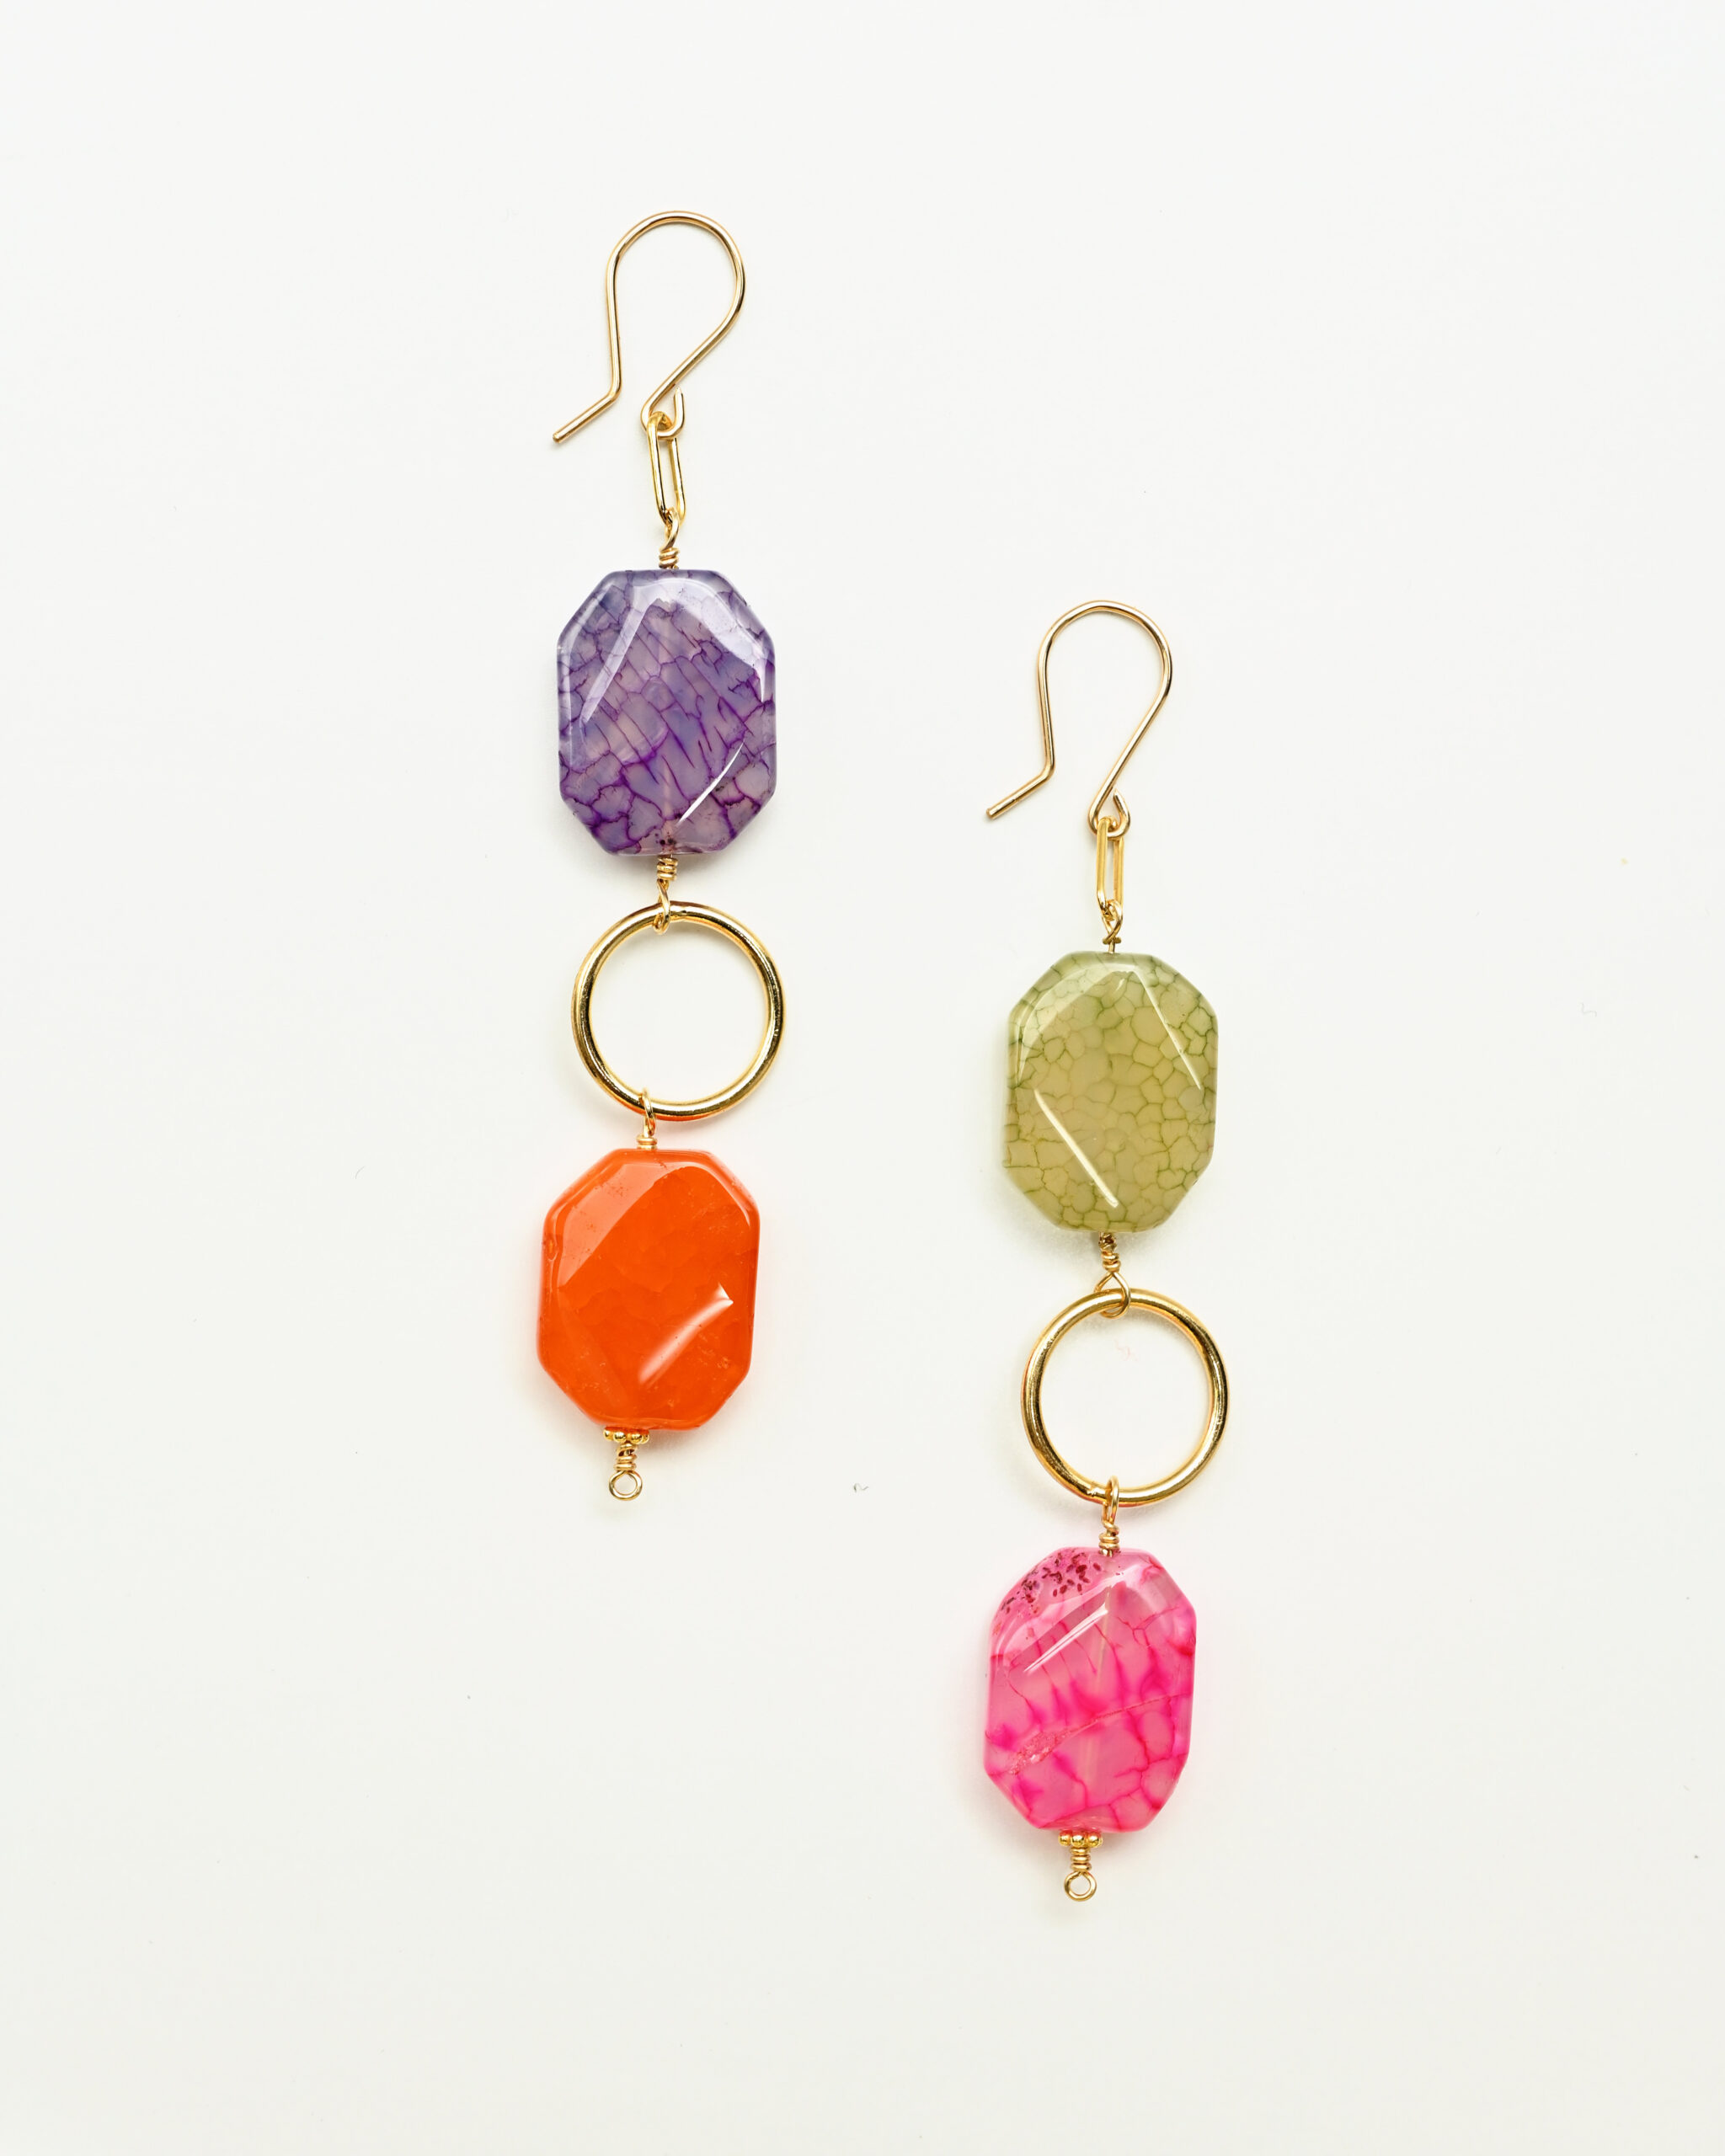 14k gold filled drop earrings with dragon veins agate and 18k gold plated AG 925 elements